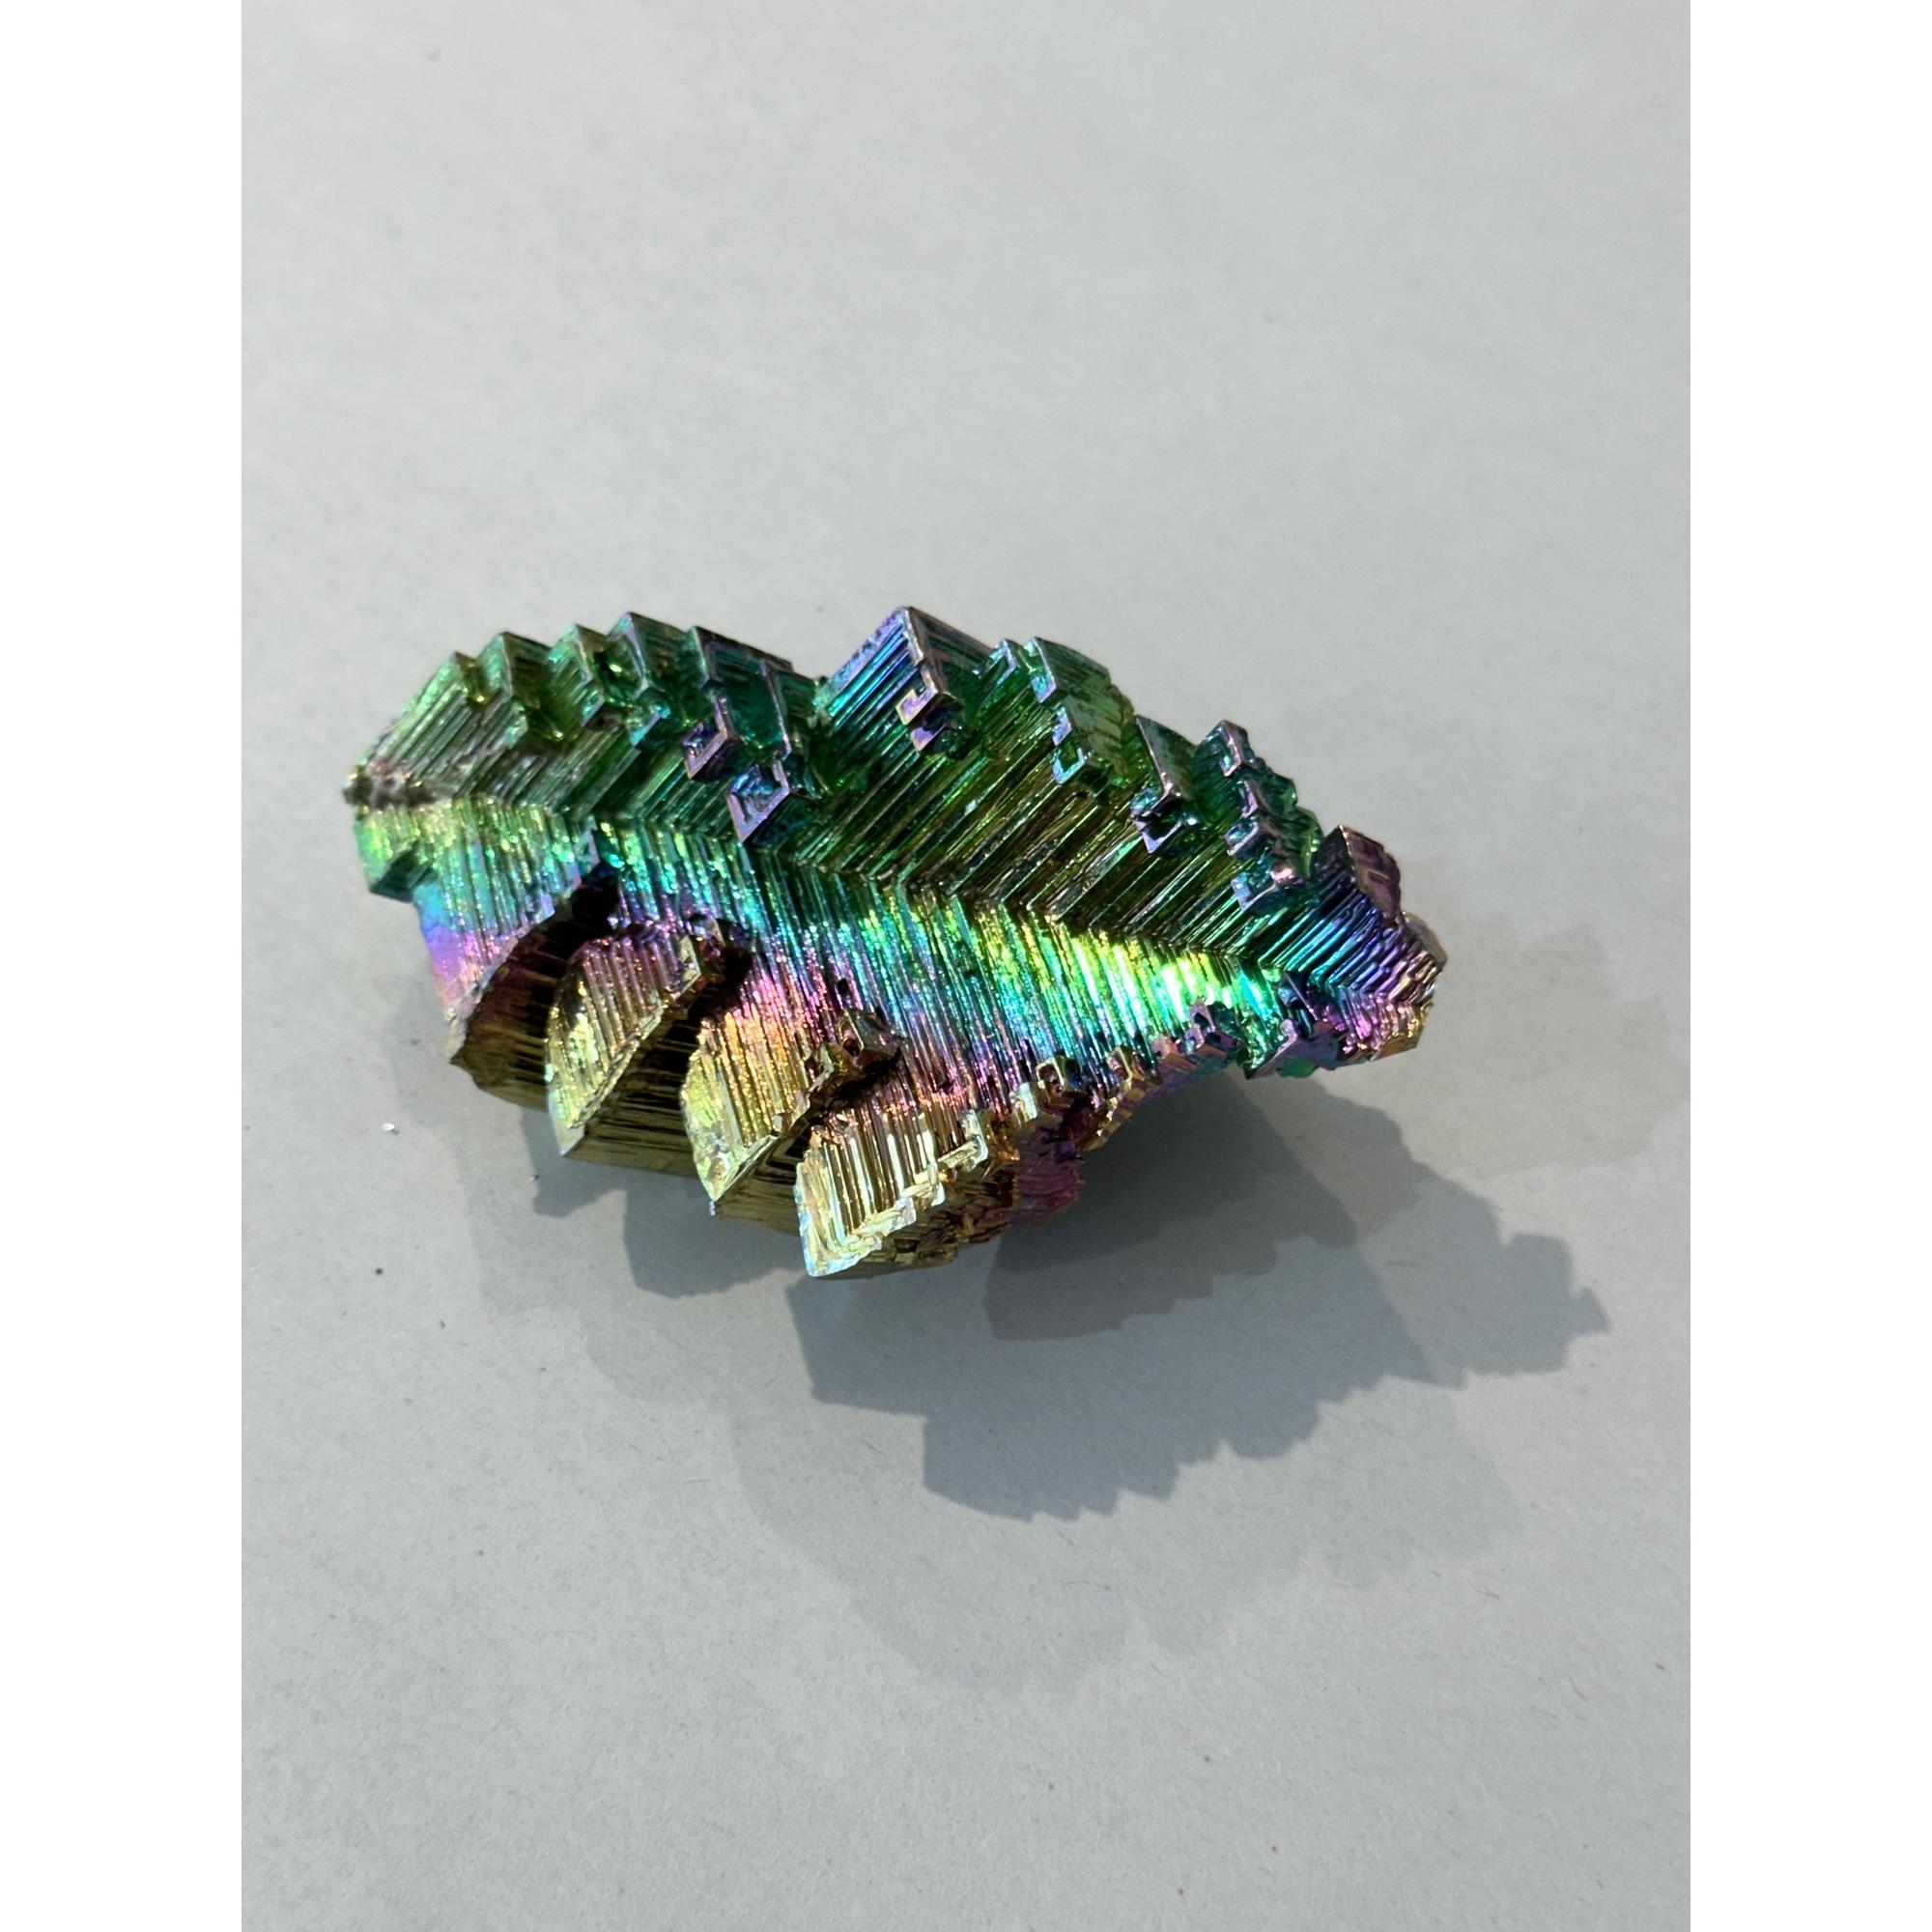 Bismuth, Bi on Periodic table, Gorgeous greens, stunning Prehistoric Online